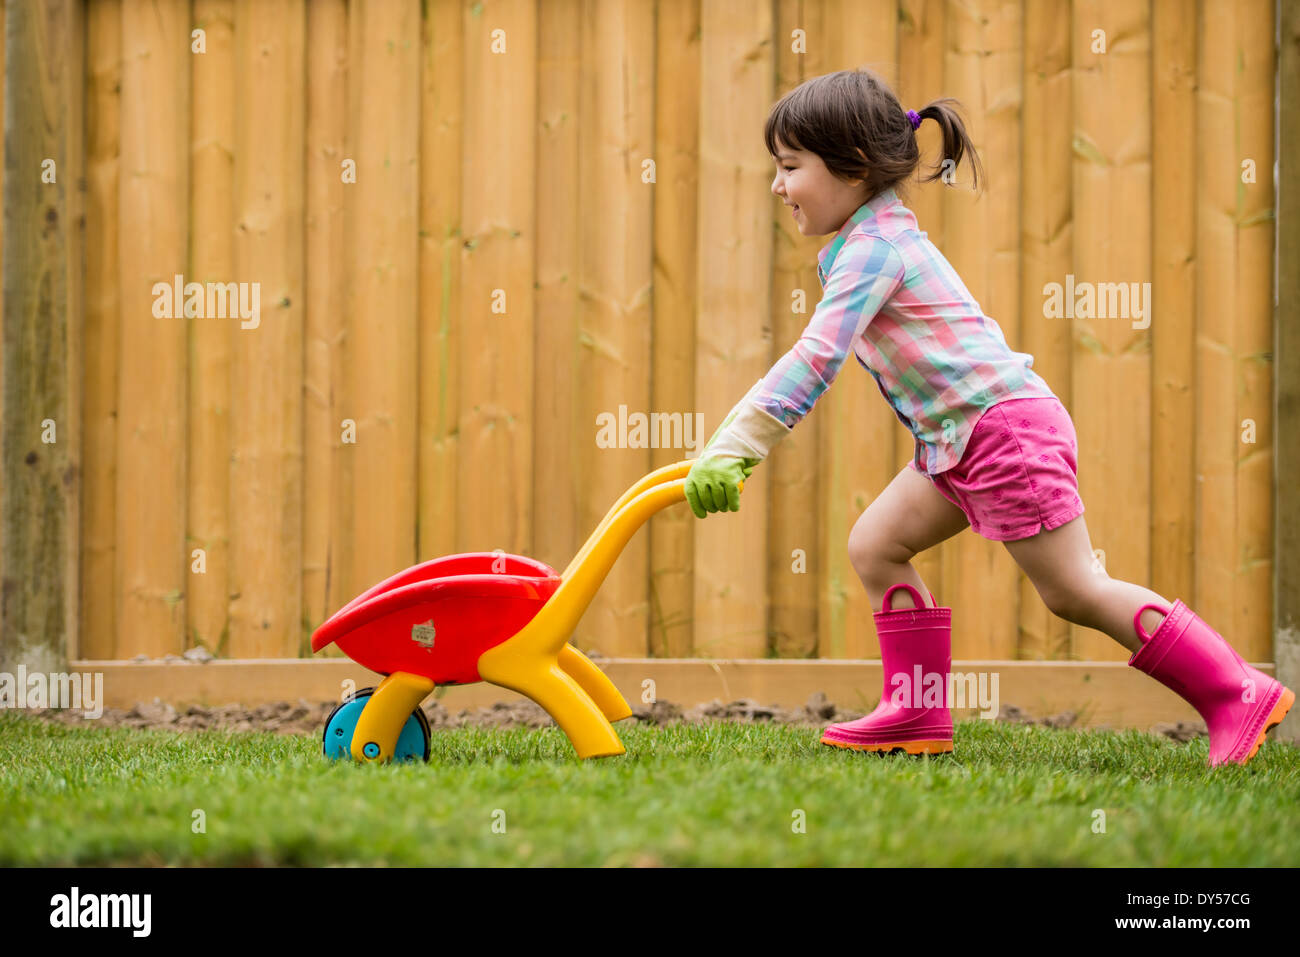 Young girl running with toy wheelbarrow in the garden Stock Photo